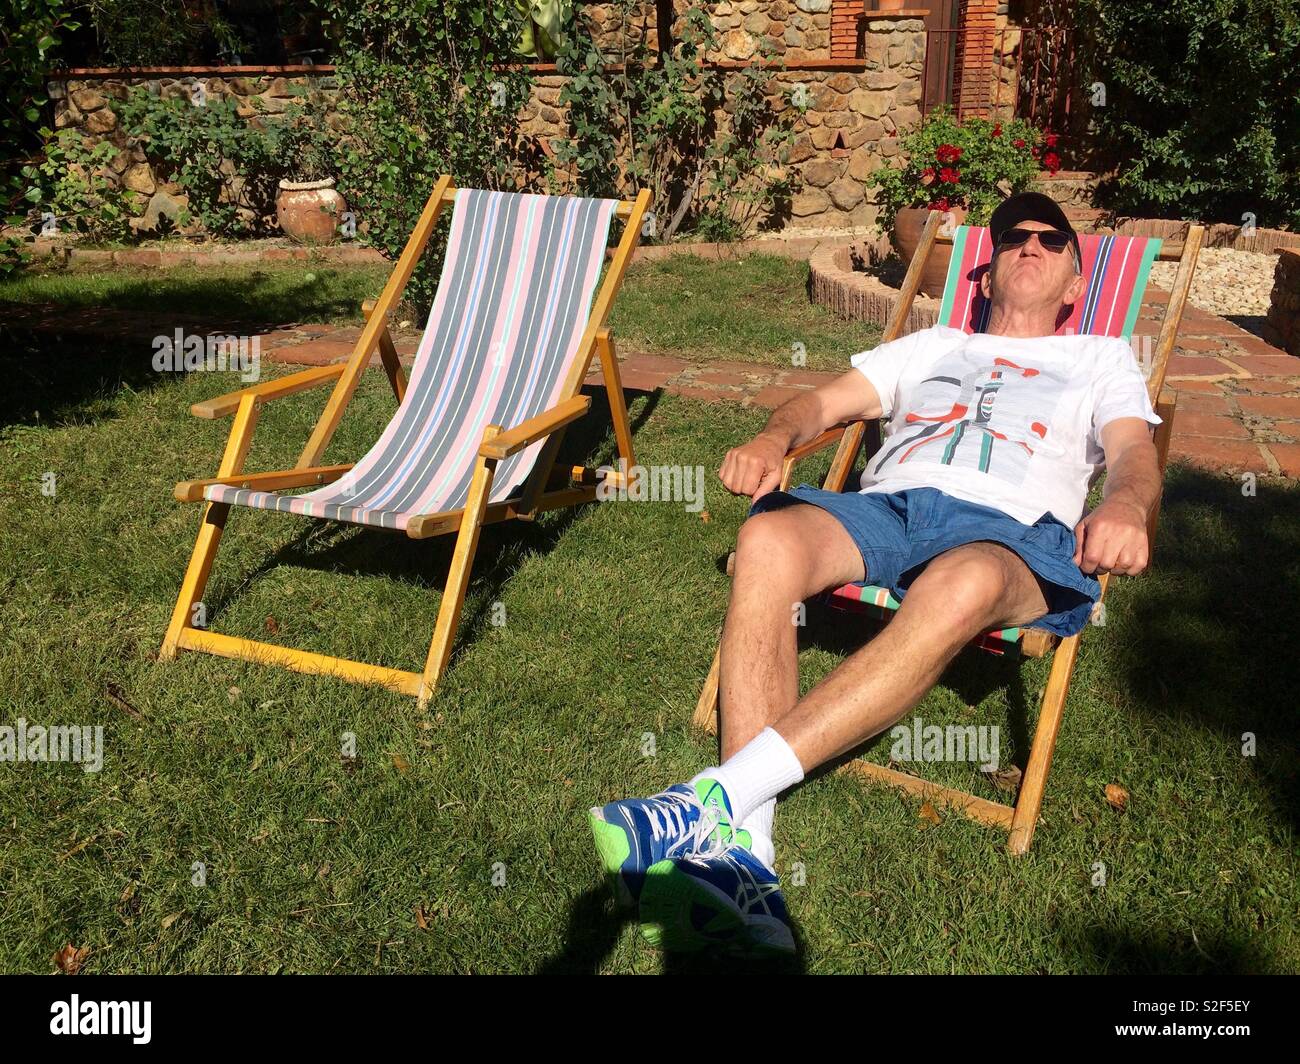 Man lying on deck chair catching a suntan on a sunny day in a garden Stock Photo